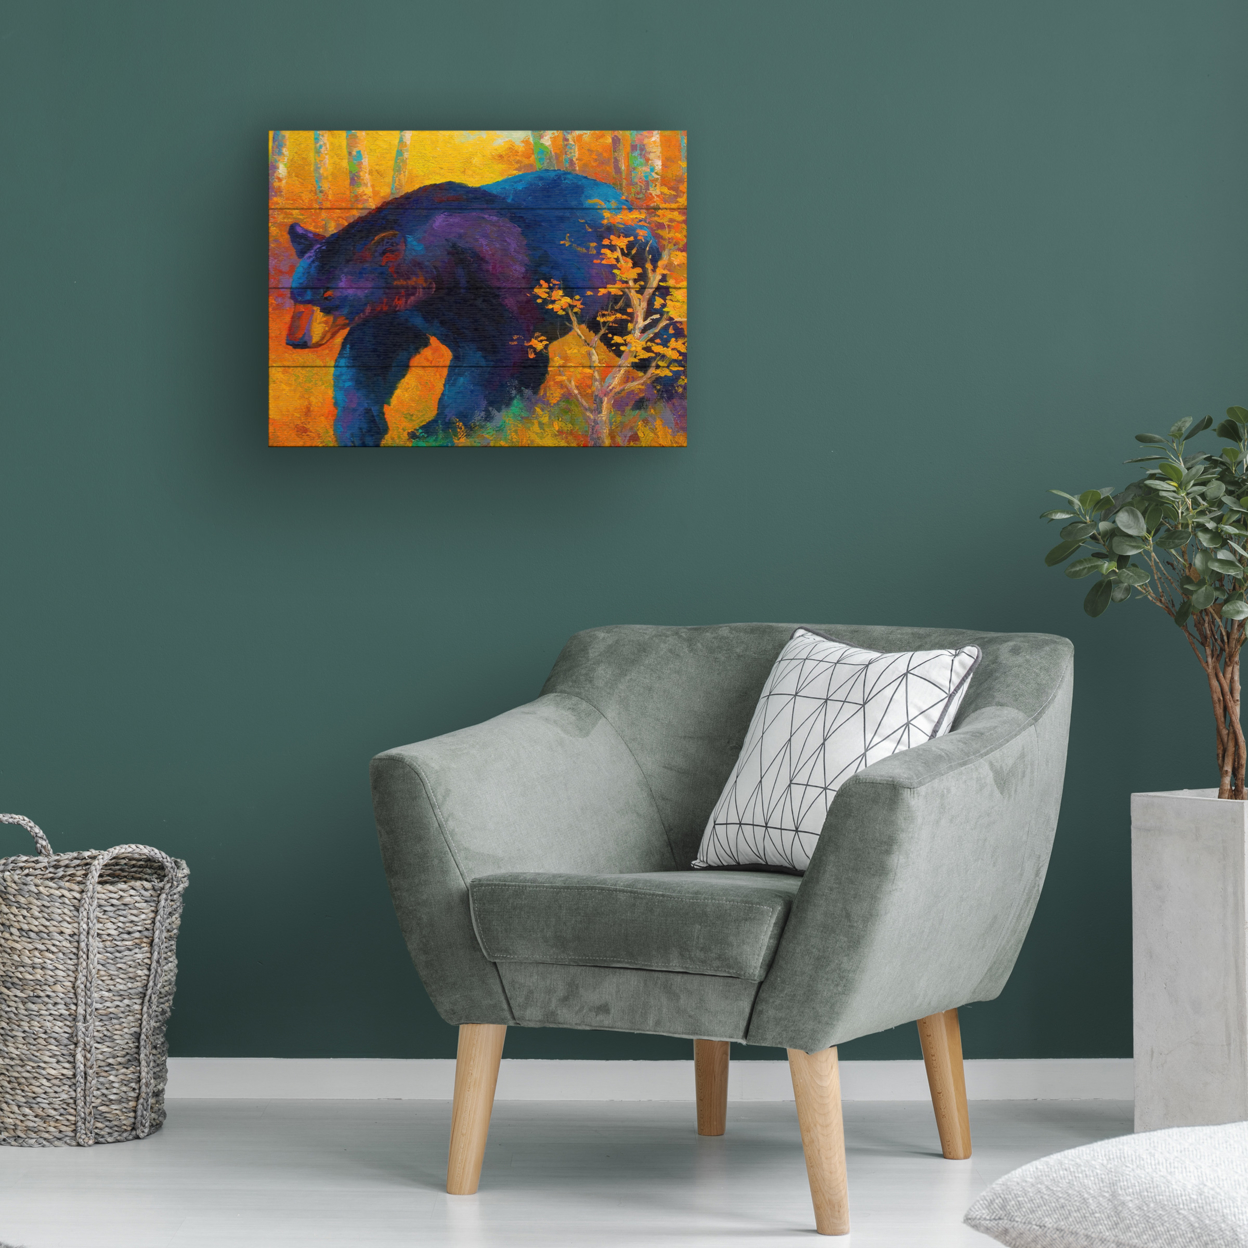 Wall Art 12 X 16 Inches Titled In To Spring Black Bear Ready To Hang Printed On Wooden Planks